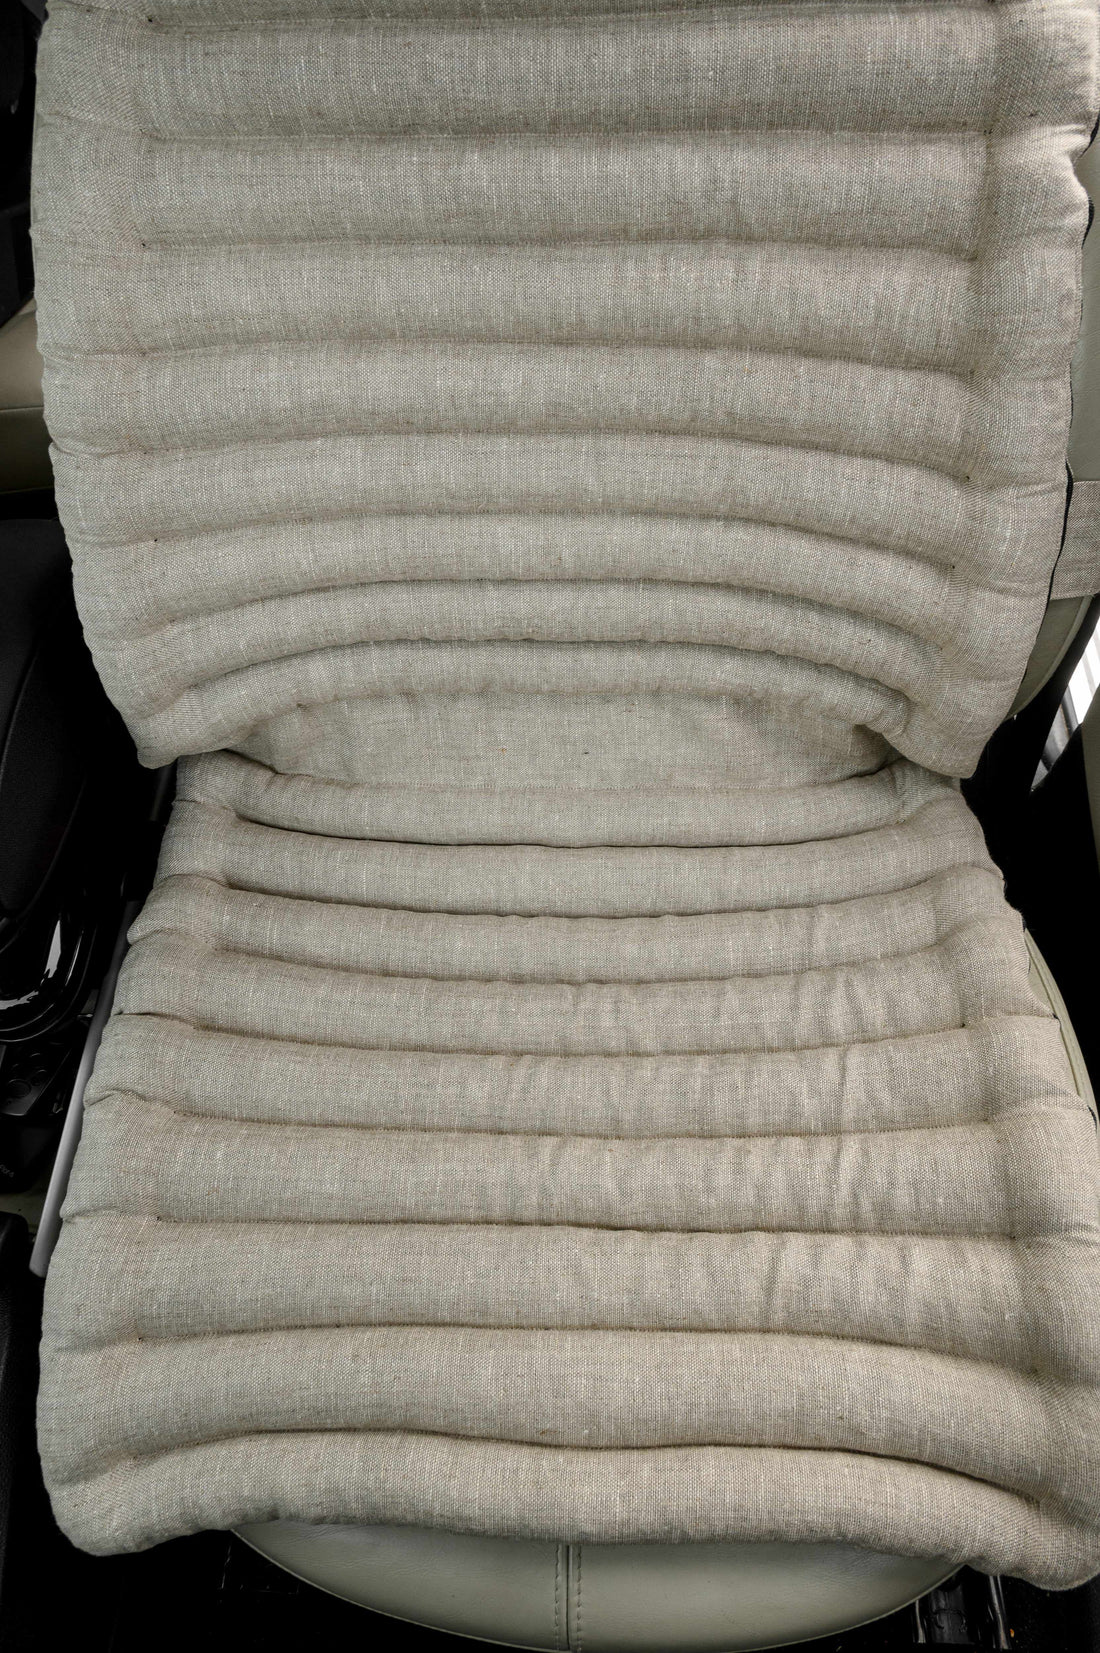 Organic Infant Car Seat Linen Covers with Flax Inserts | Wholesome Linen Infant Car Seat Liners 0 - 2 Years